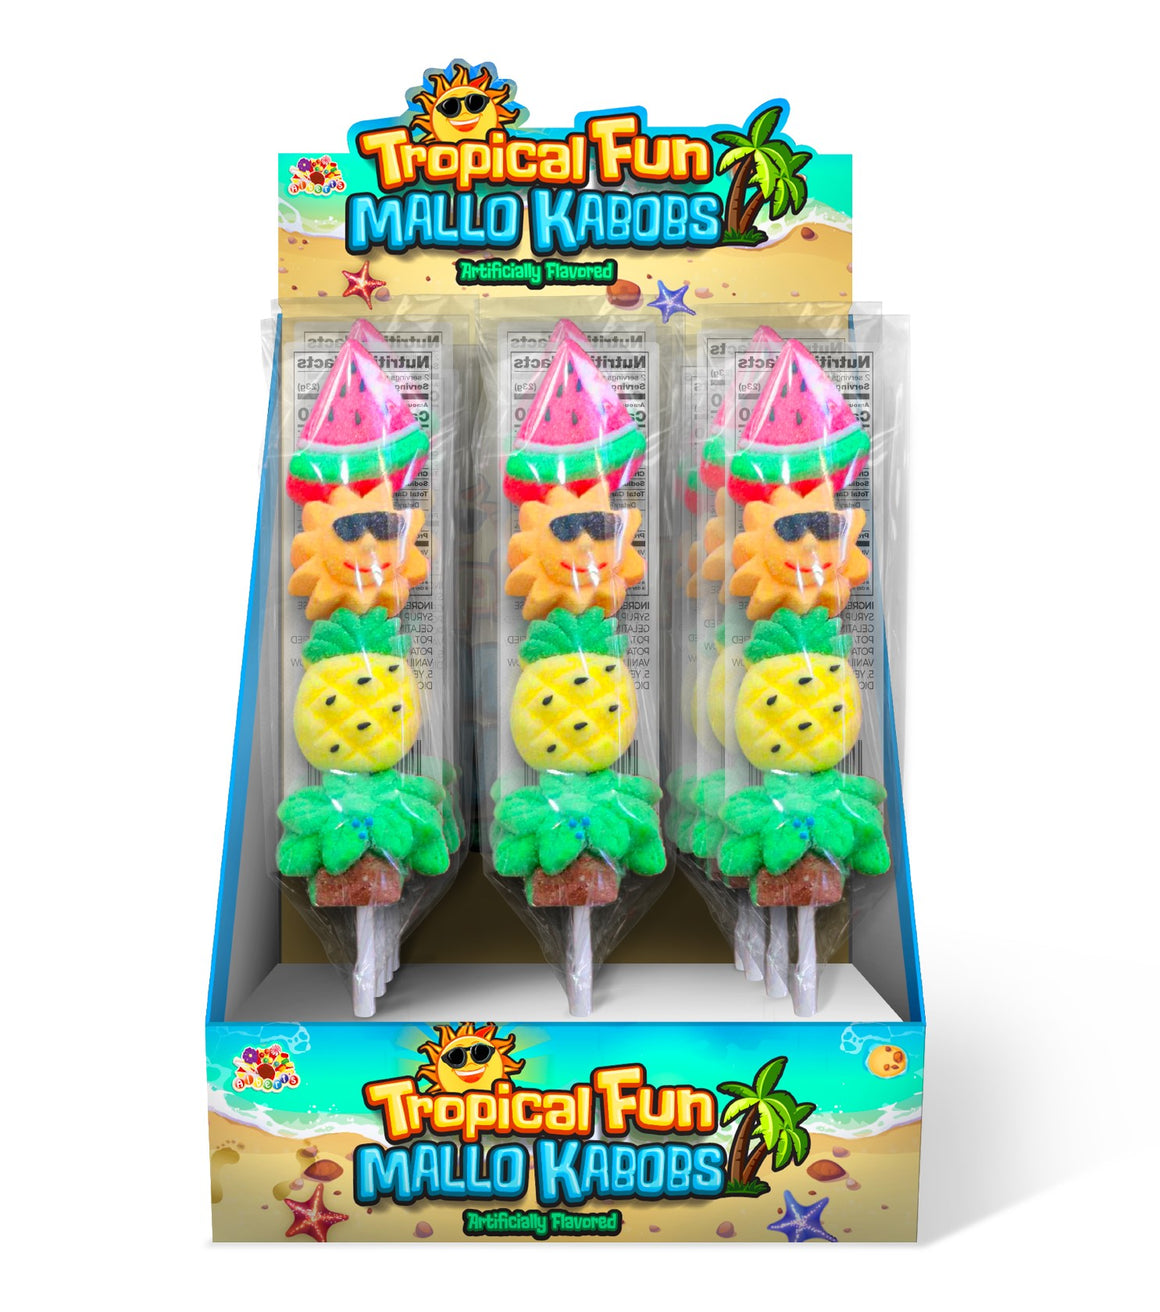 Albert's Tropical Fun Mallo Kabobs 1.6 oz. visit www.allcitycandy.com for fresh and delicious sweet candy treats